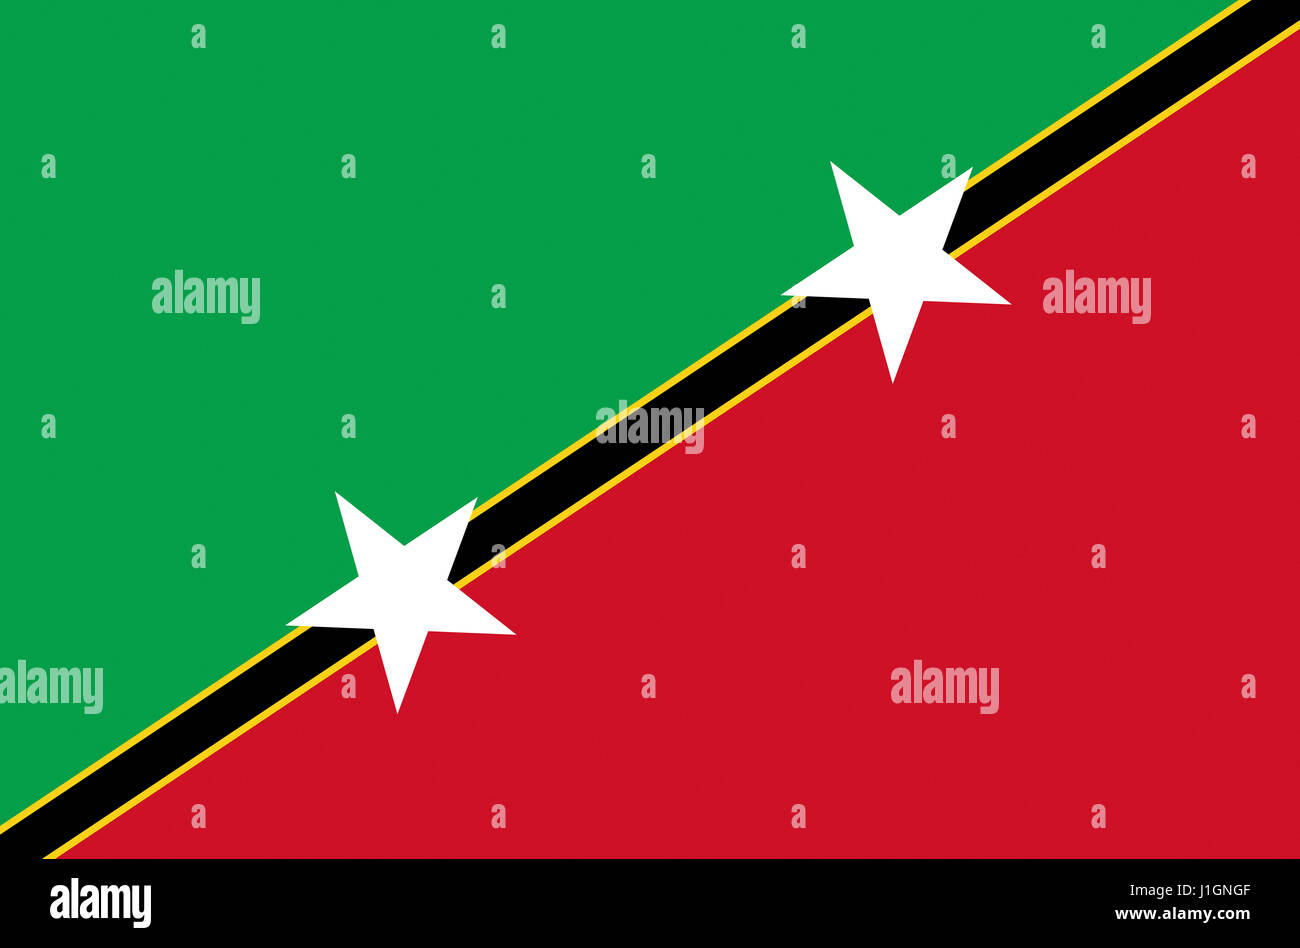 Illustration of the flag of Saint Kitts and Nevis Stock Photo